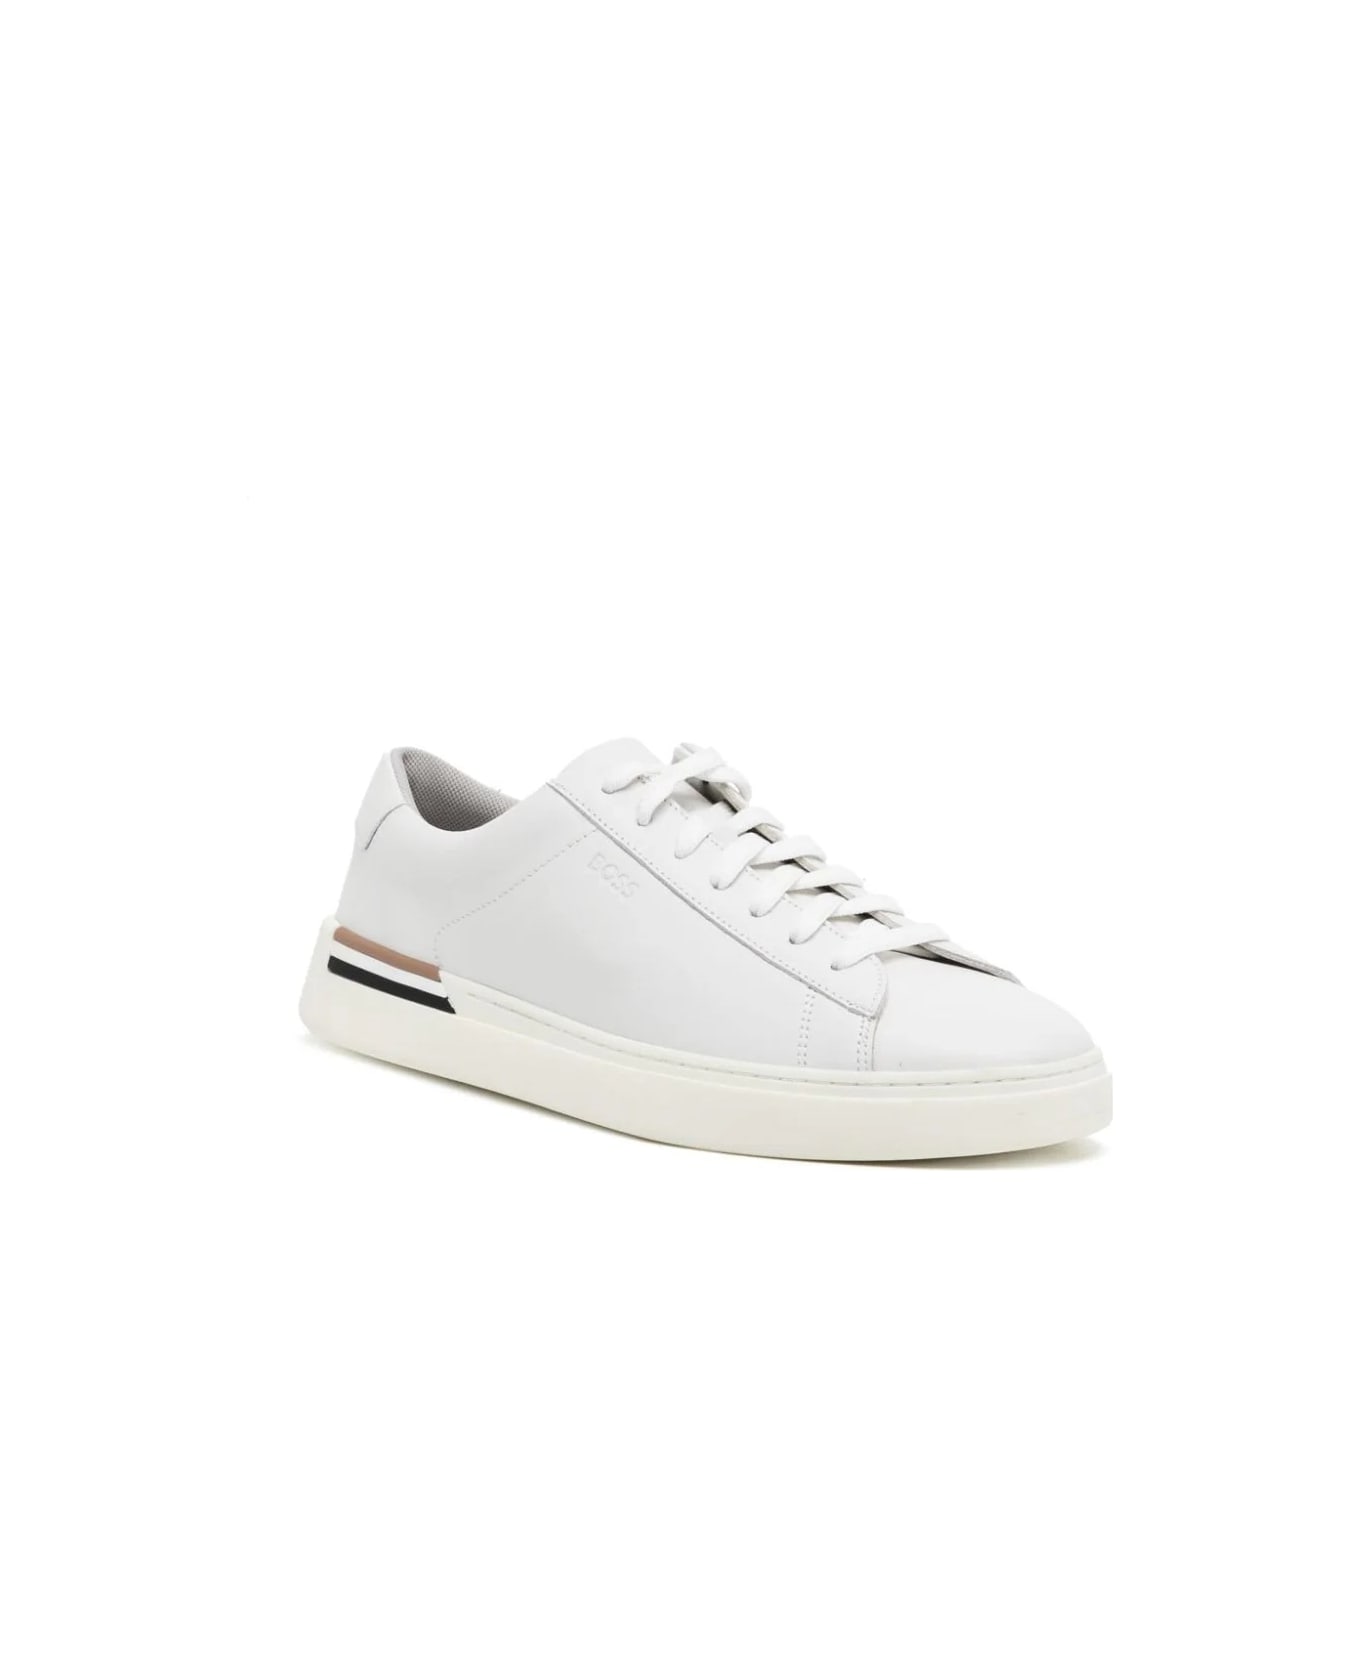 Hugo Boss White Leather Sneakers With Preformed Sole, Logo And Typical Brand Stripes - White